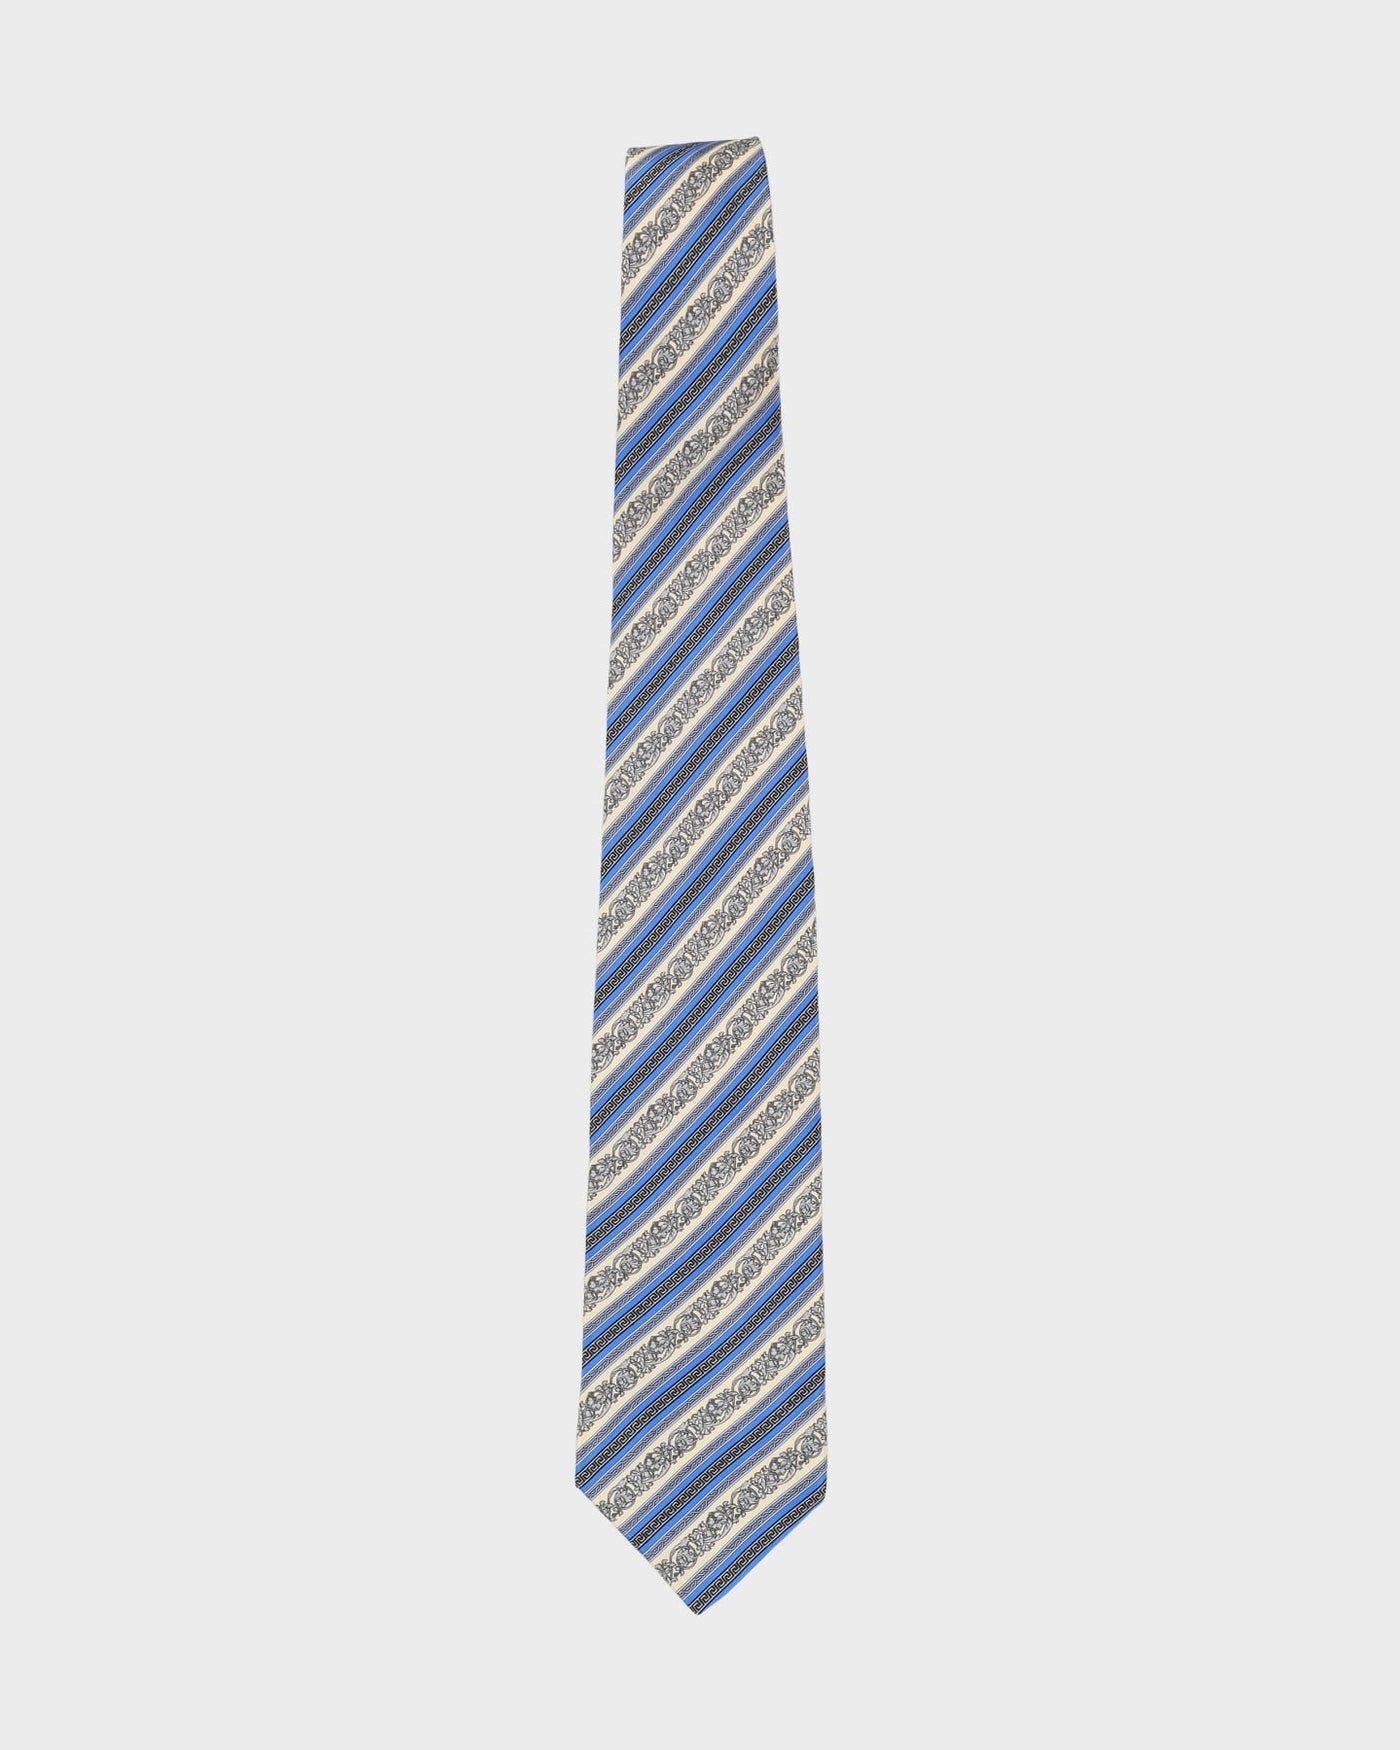 90s Gianni Versace Blue / Cream Patterned Tie